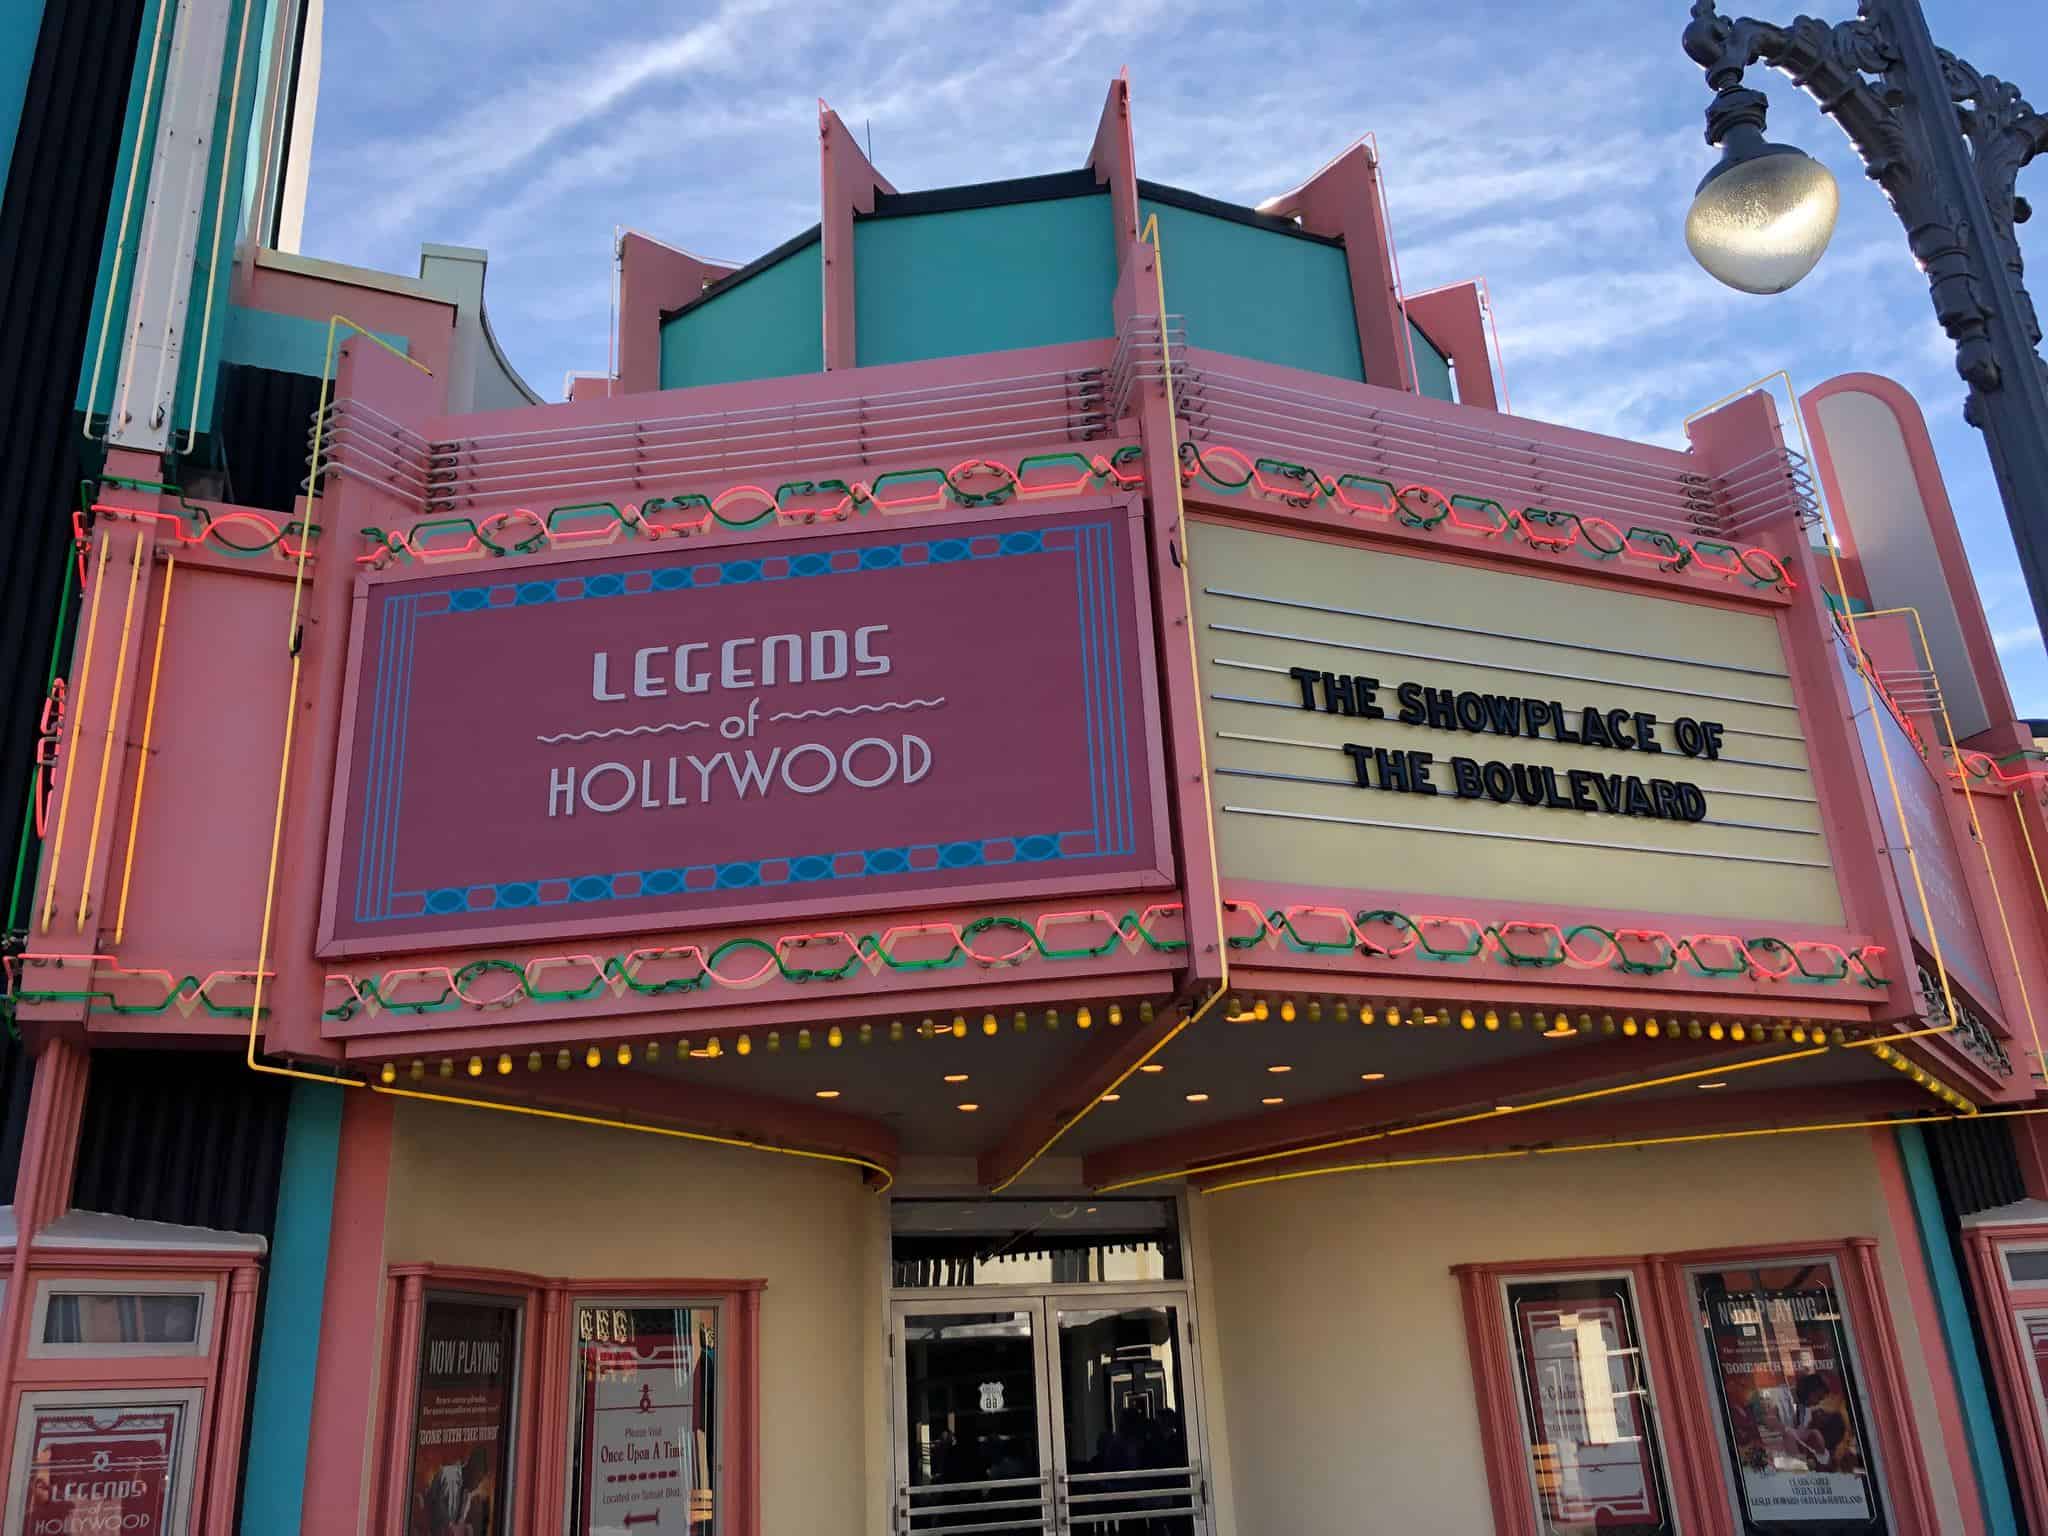 PHOTOS: Planet Hollywood Signage Removed, Legends of Hollywood Signs Go